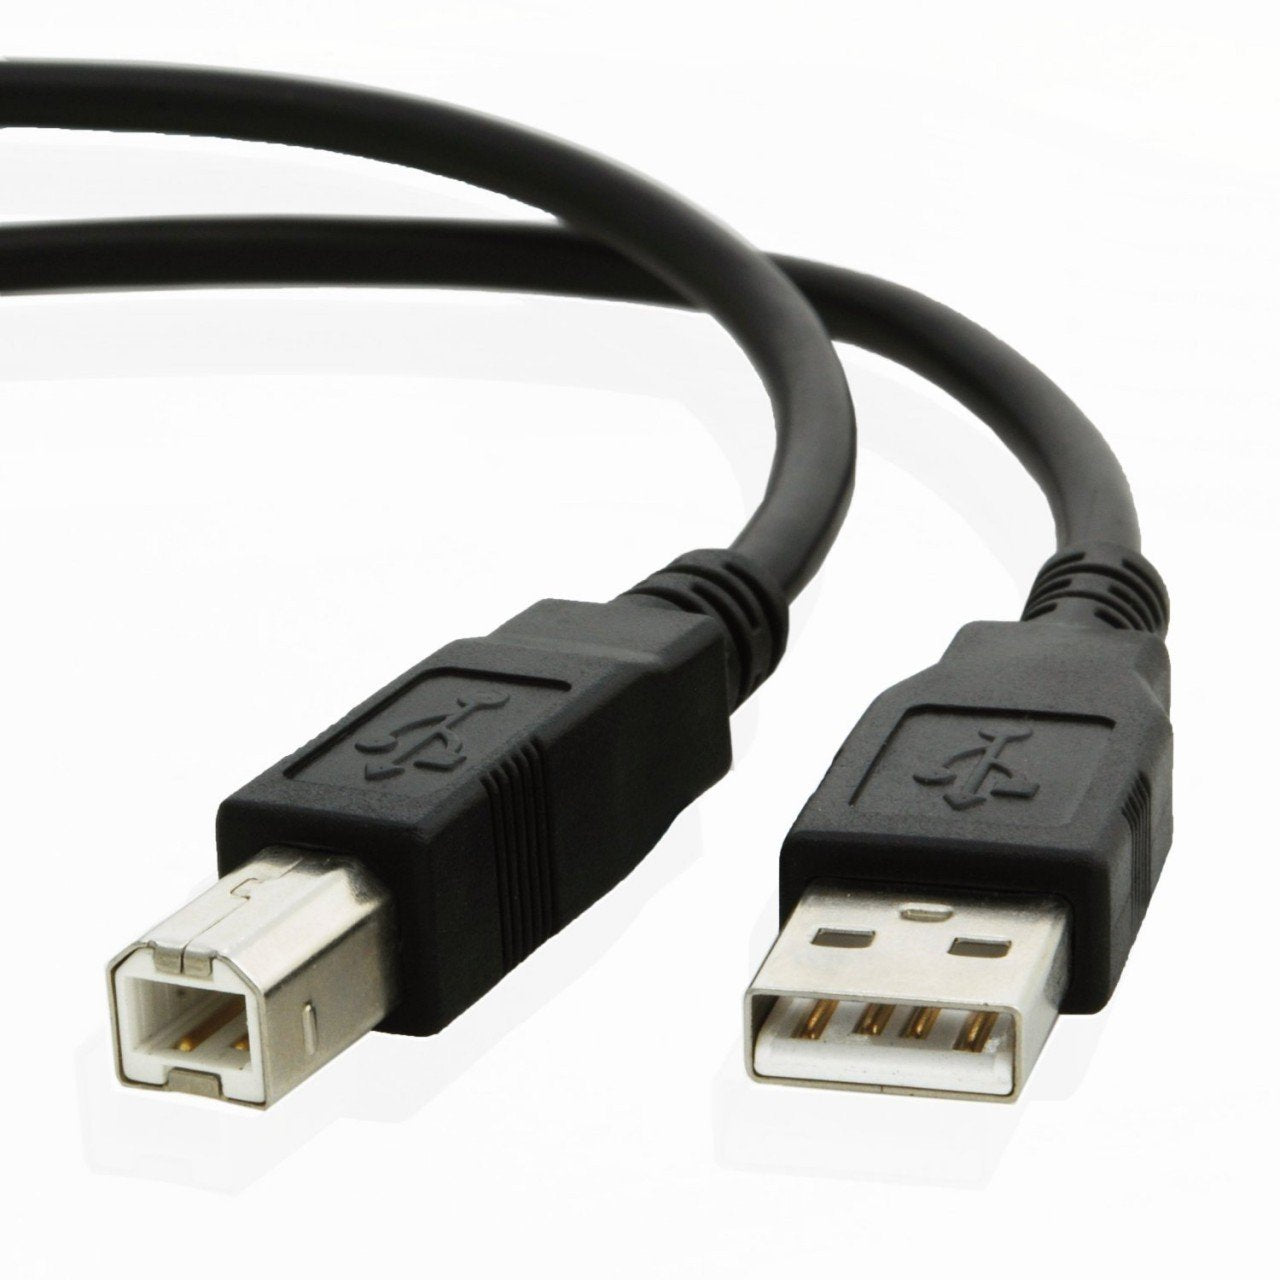 USB cable for Brother MFC-L2700DW